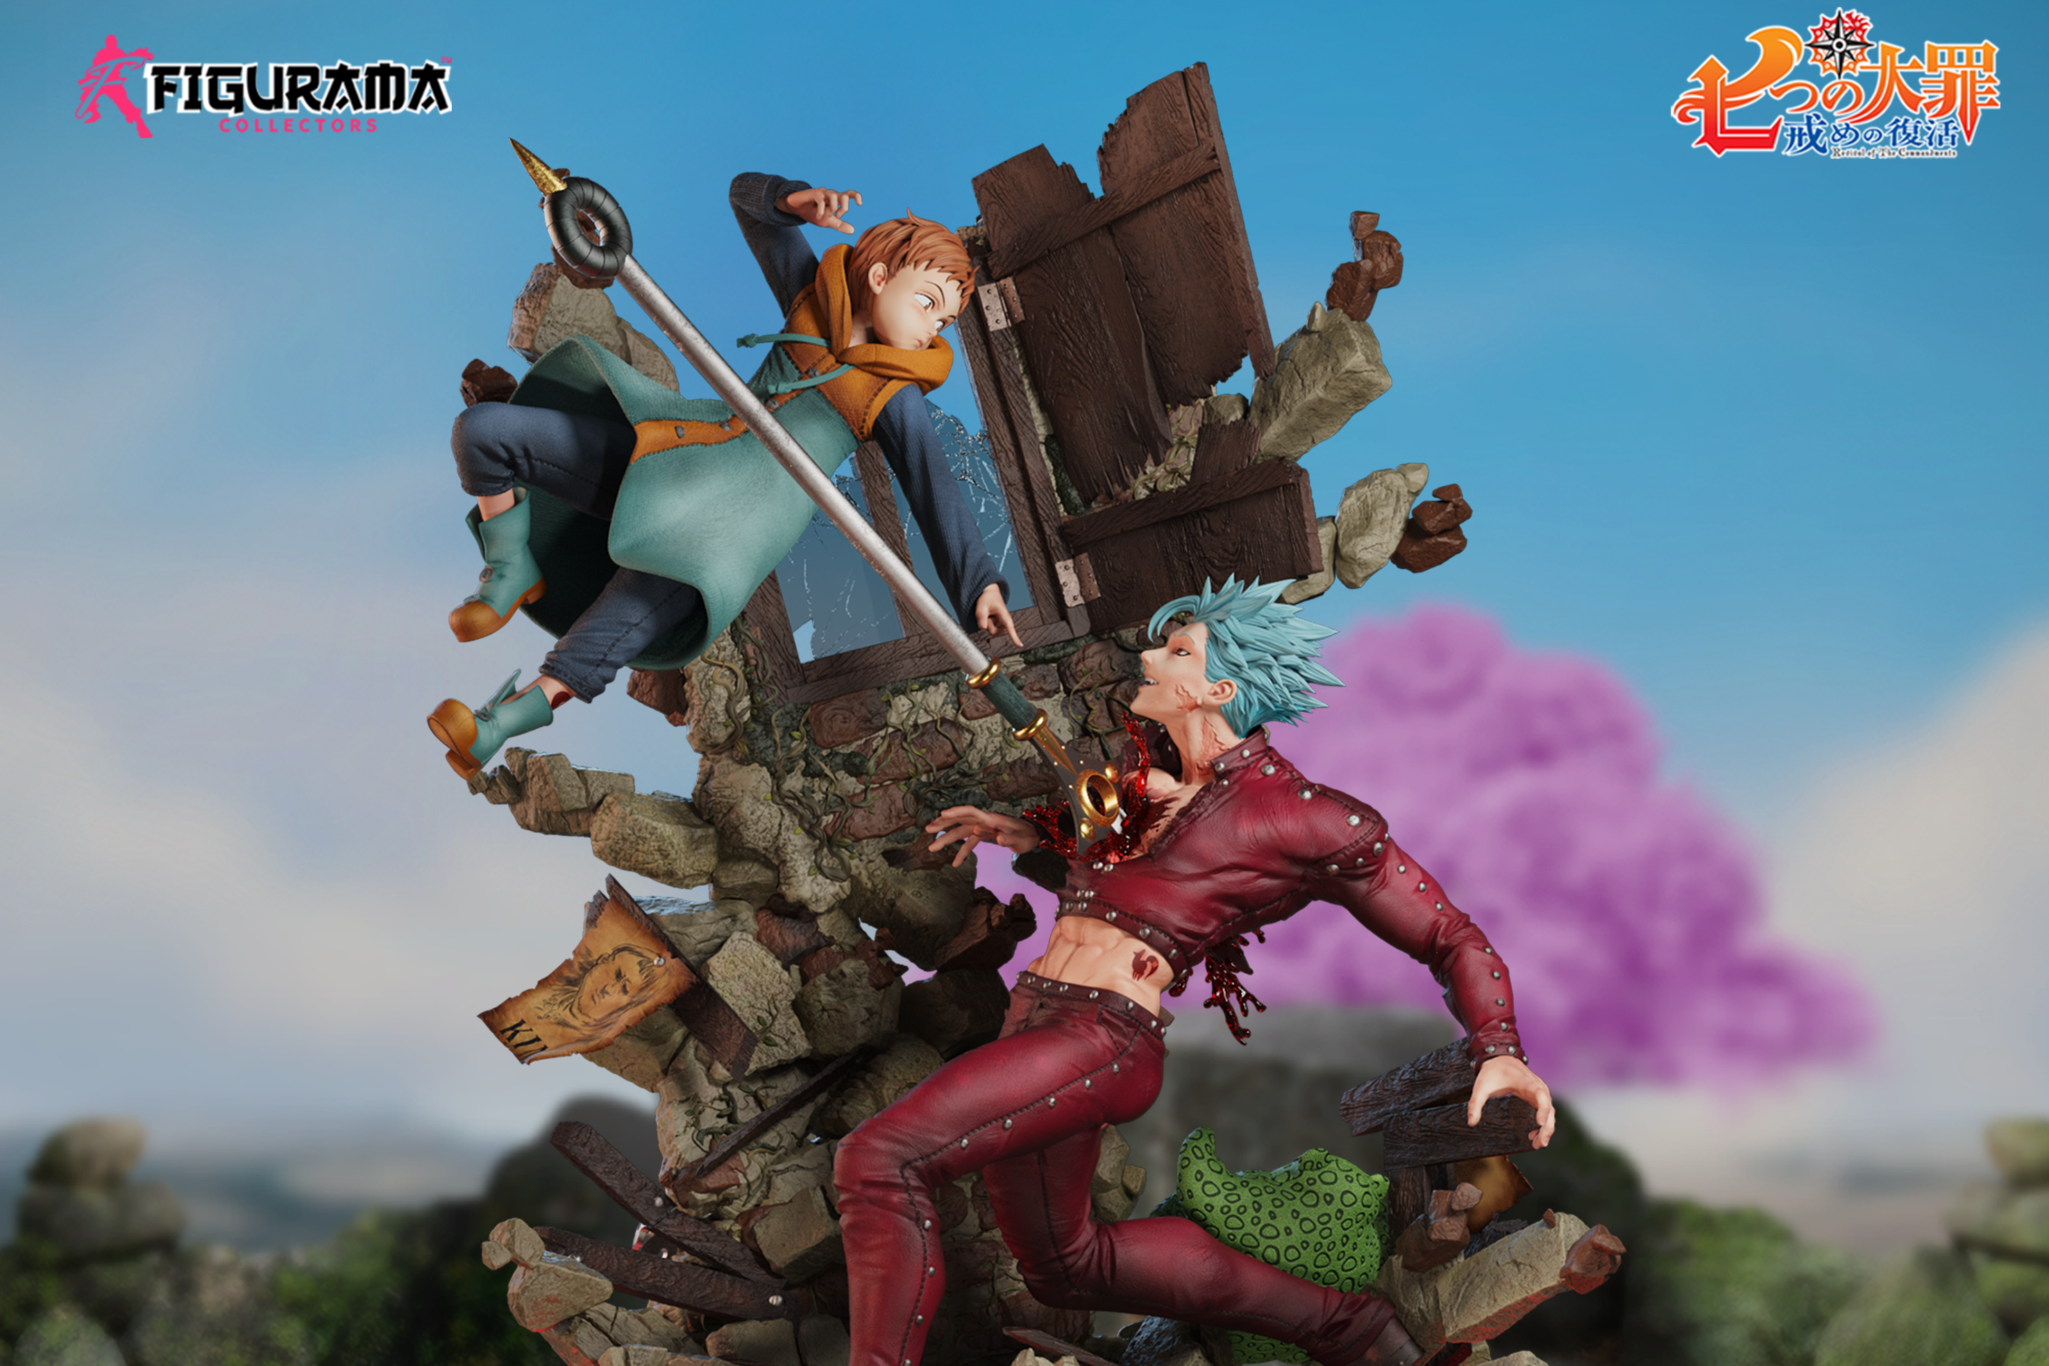 Figurama Reveal Upcoming Seven Deadly Sins Statue of Ban vs King